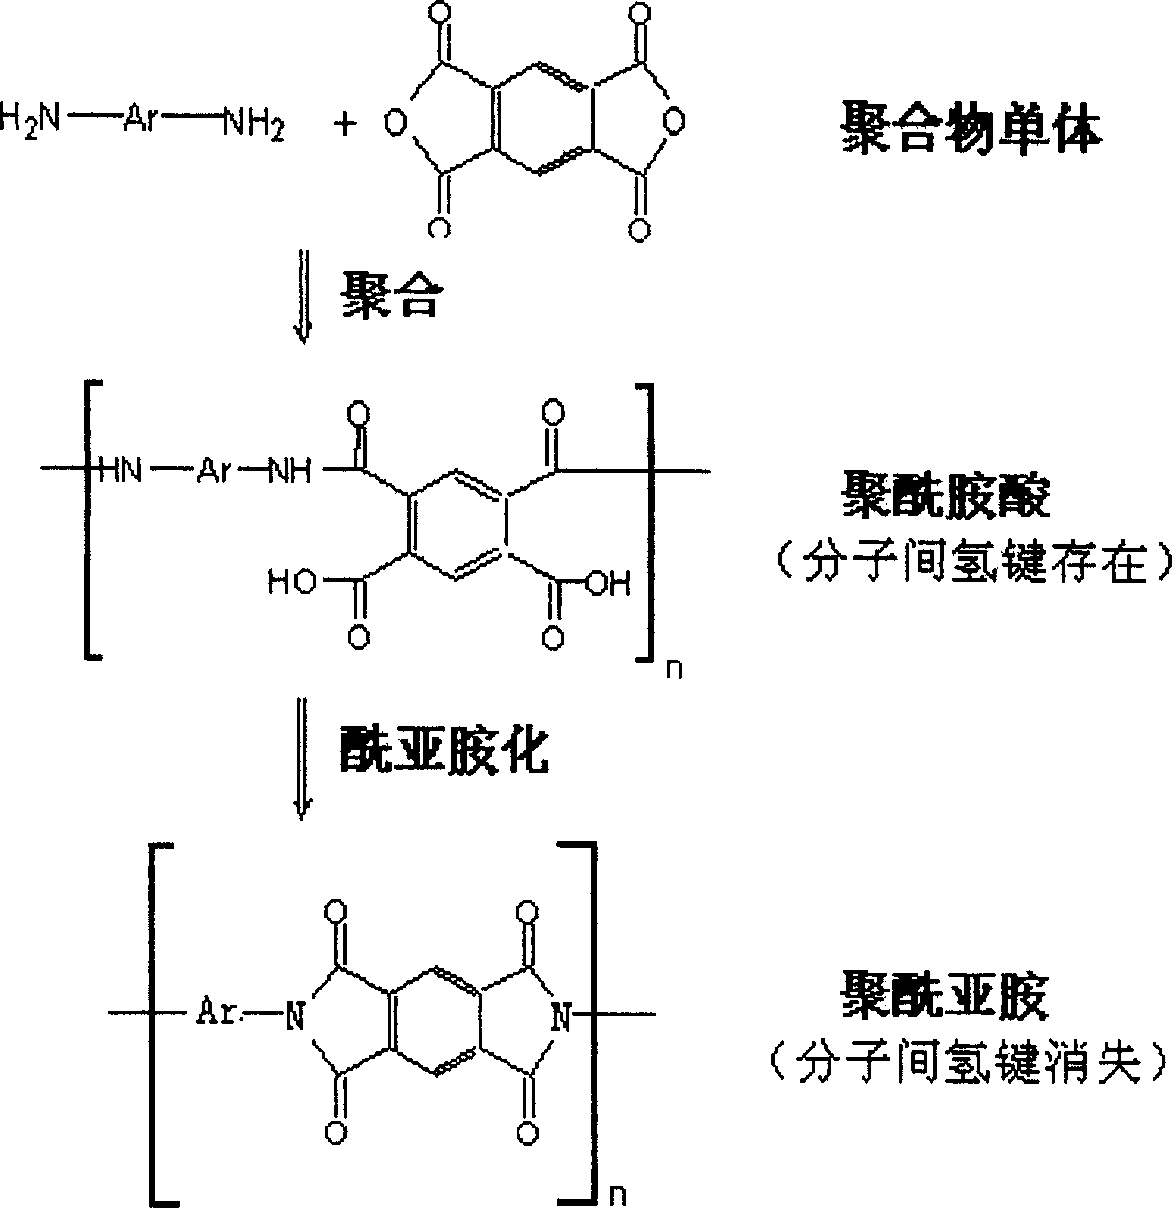 Polyimide fibre containing benzimidazole structure and preparation method thereof